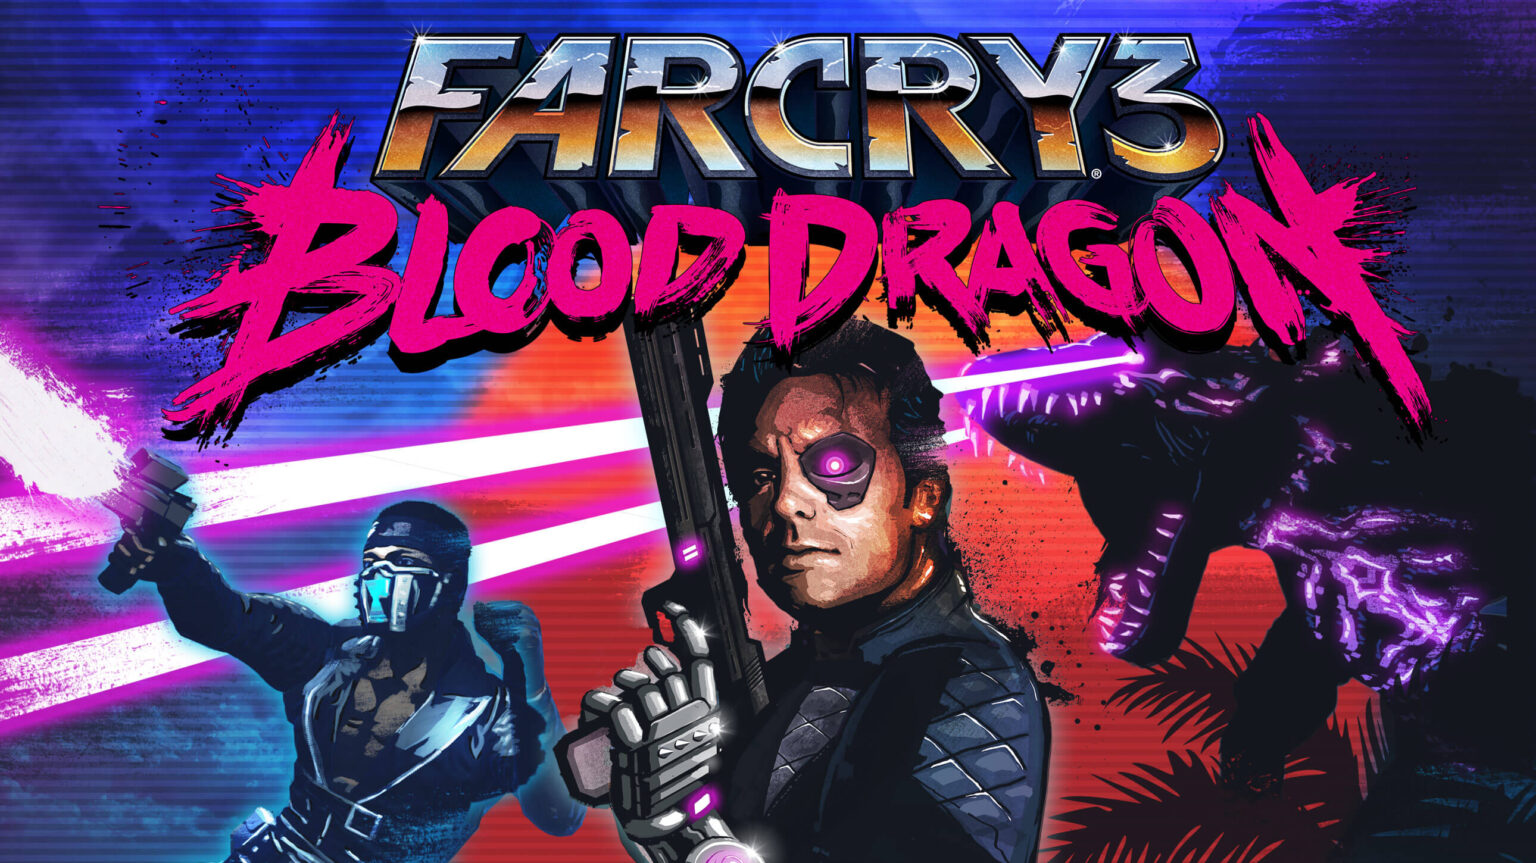 download far cry 3 blood dragon classic edition for free